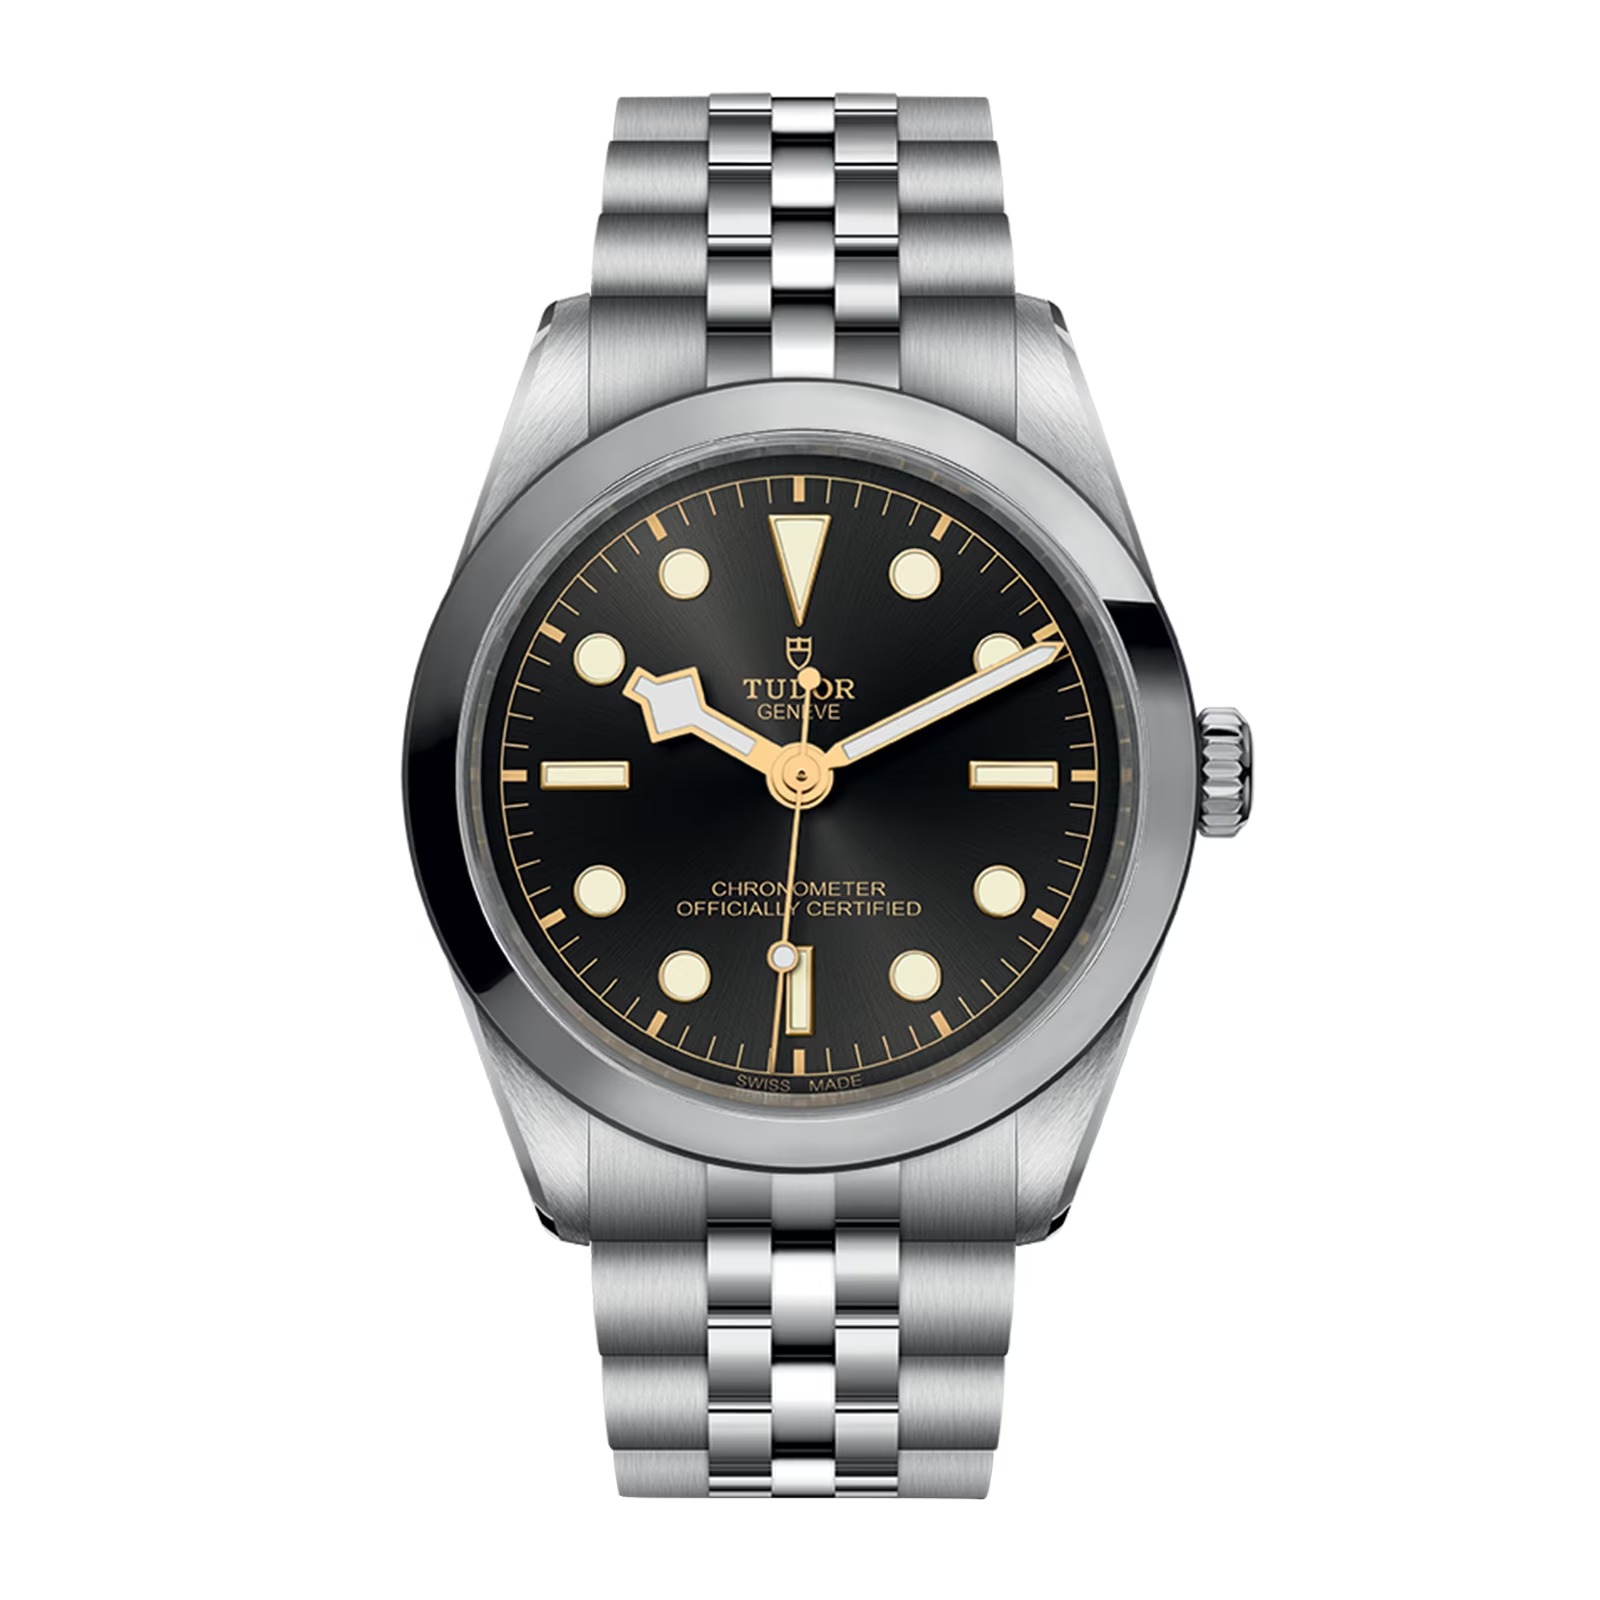 Tudor Black Bay 36 Unisex Automatic Watch M79640-0001 In Anthracite / Black / Gold Tone